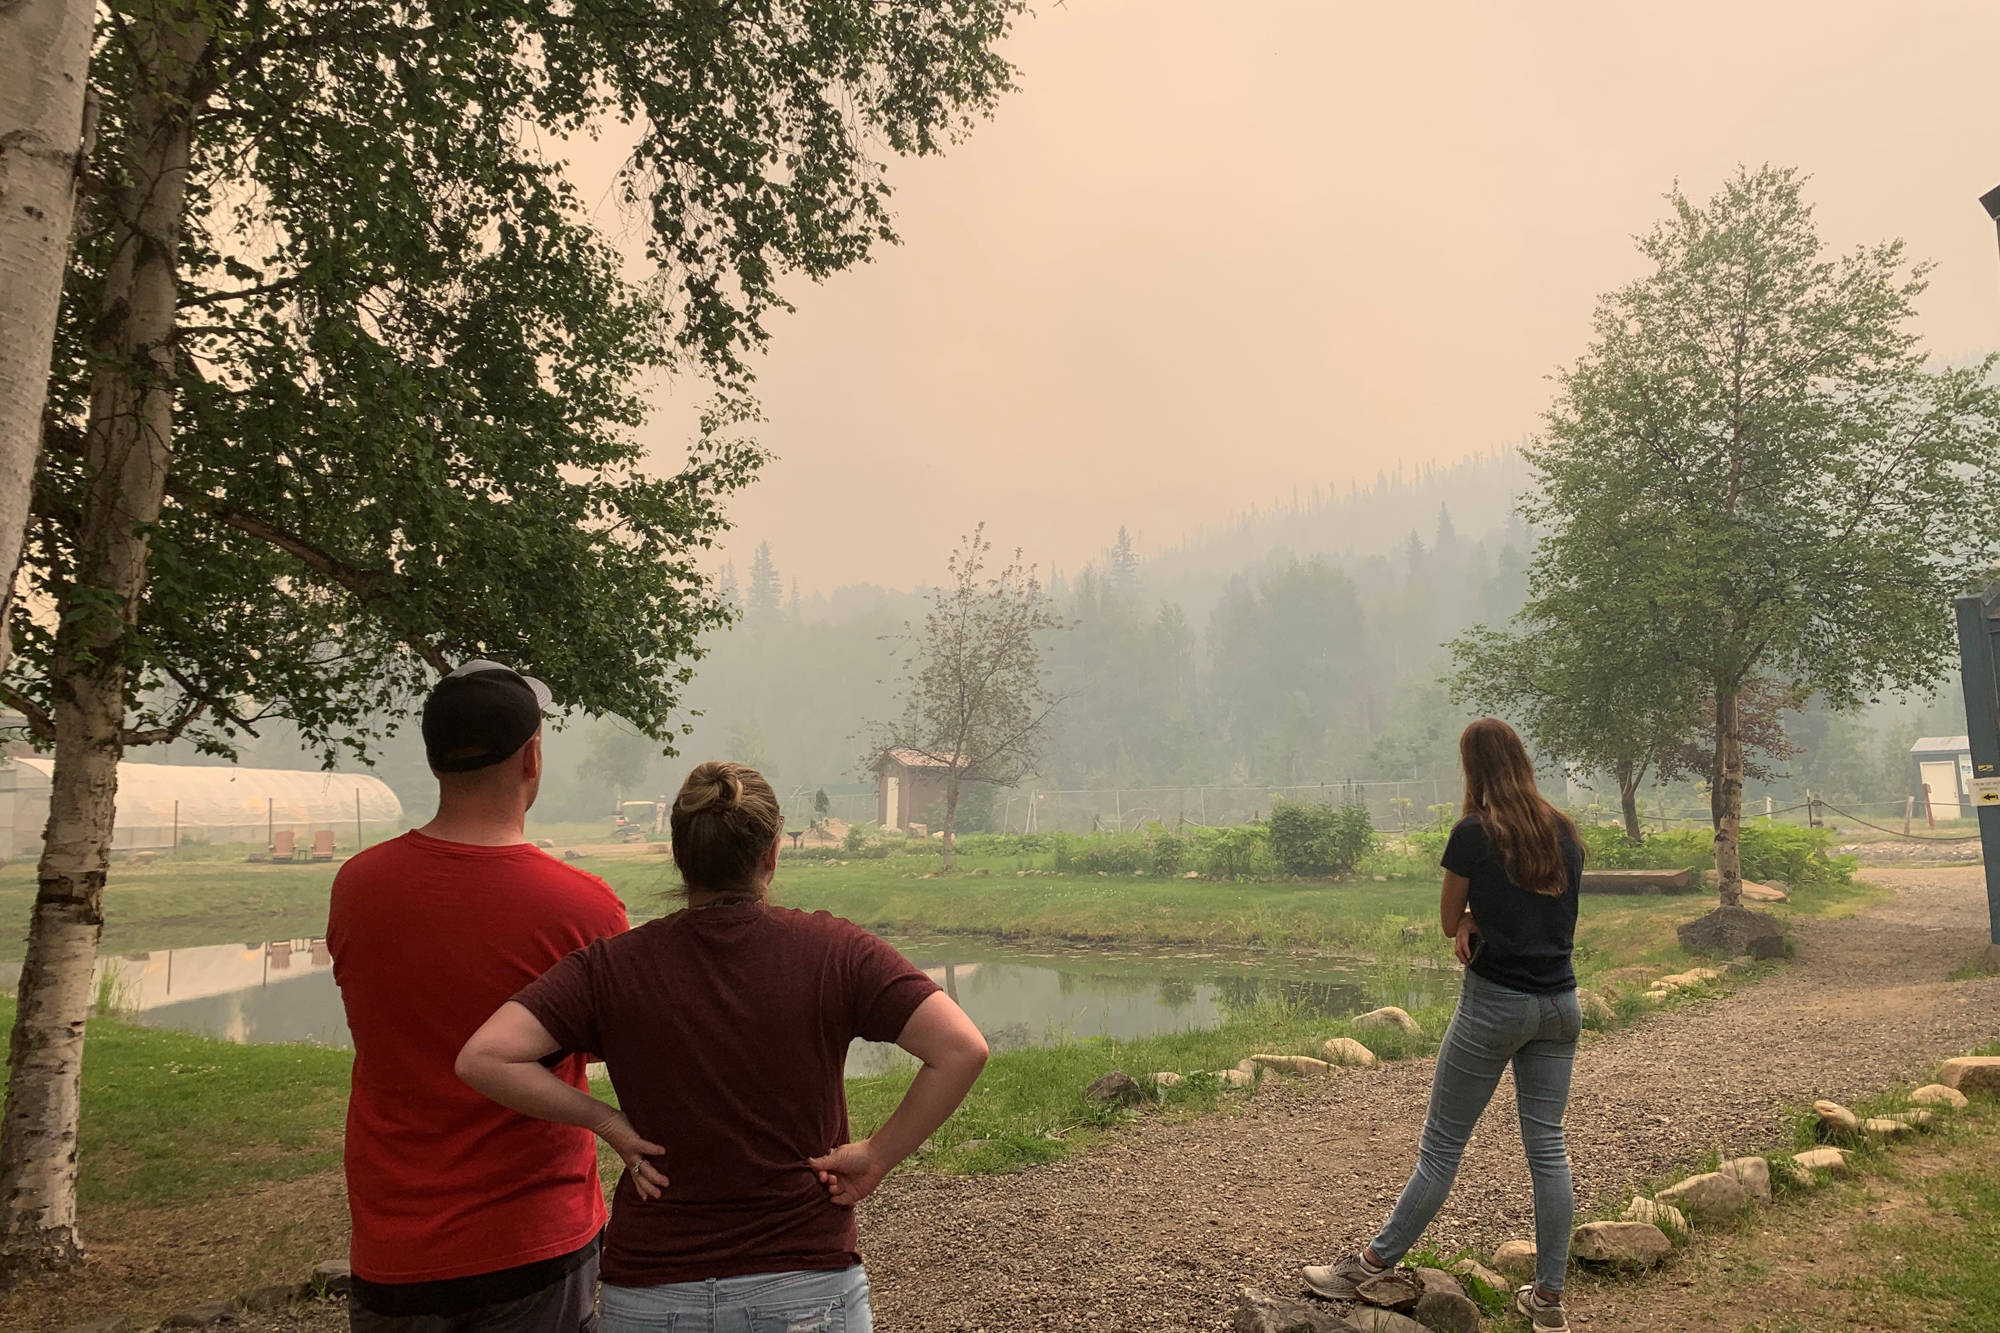 In this photo provided by the Alaska Division of Forestry, guests at the Chena Hot Springs Resort watch the Munson Creek Fire near Fairbanks, Alaska, on Monday, July 5, 2021. Authorities on Monday advised residents and guests at an Alaska hot springs resort to evacuate immediately after a nearby wildfire intensified. The Fairbanks North Star Borough issued the evacuation order when the fire reached a point less than a mile behind Chena Hot Springs. (Courtesy Photo / Alaska Division of Forestry)